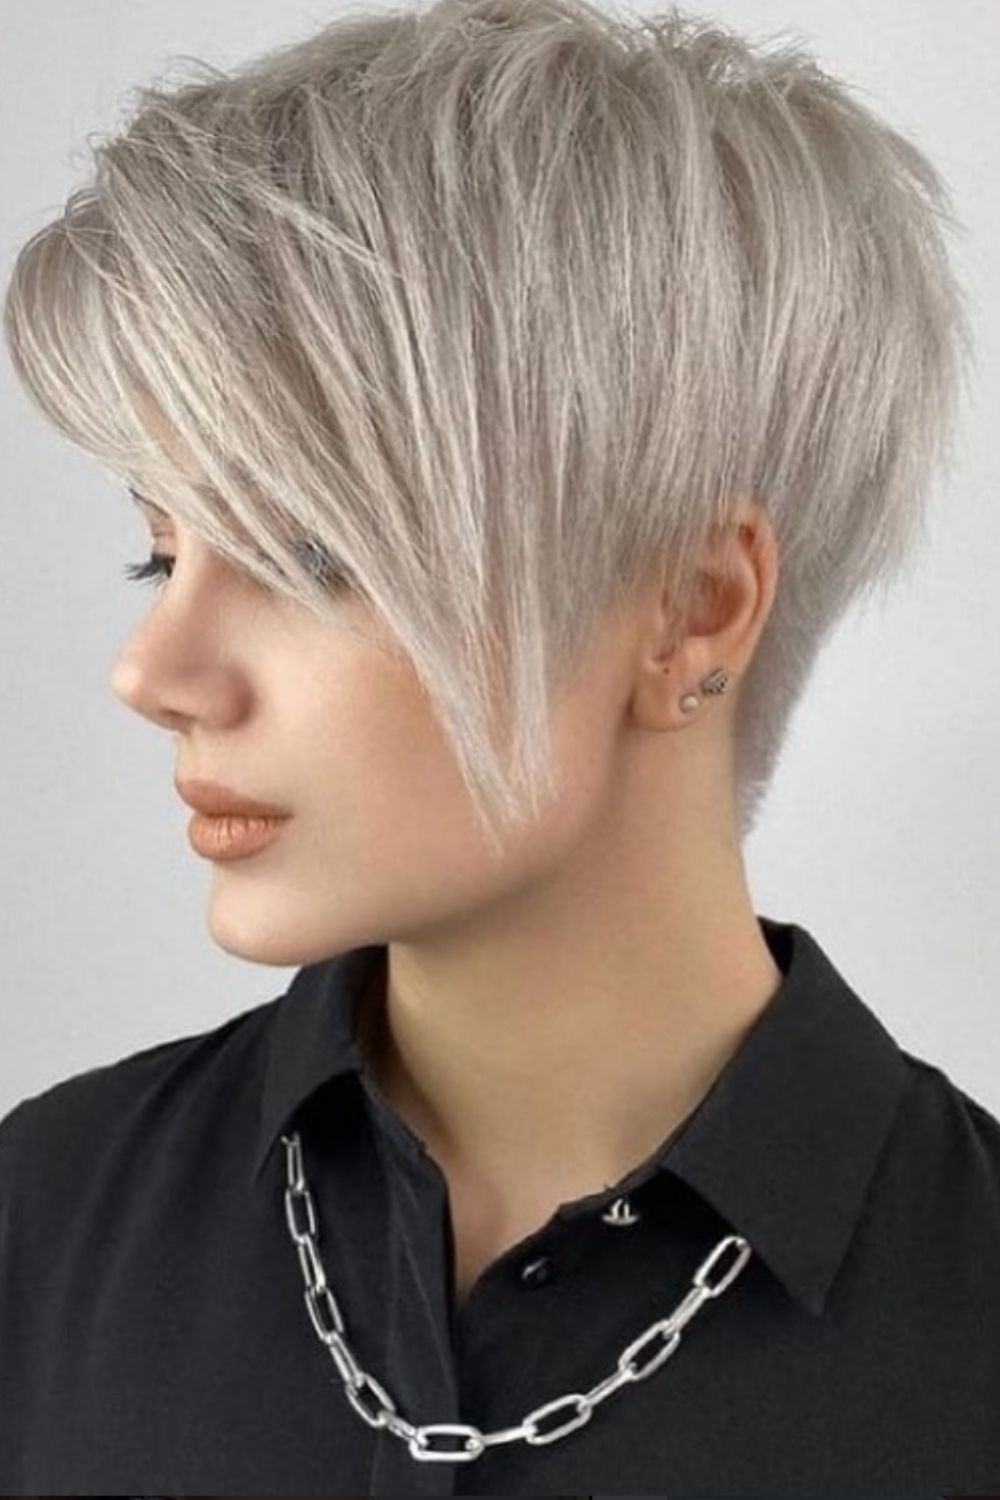 Best short pixie haircut and pixie hair styling ideas for fine hair